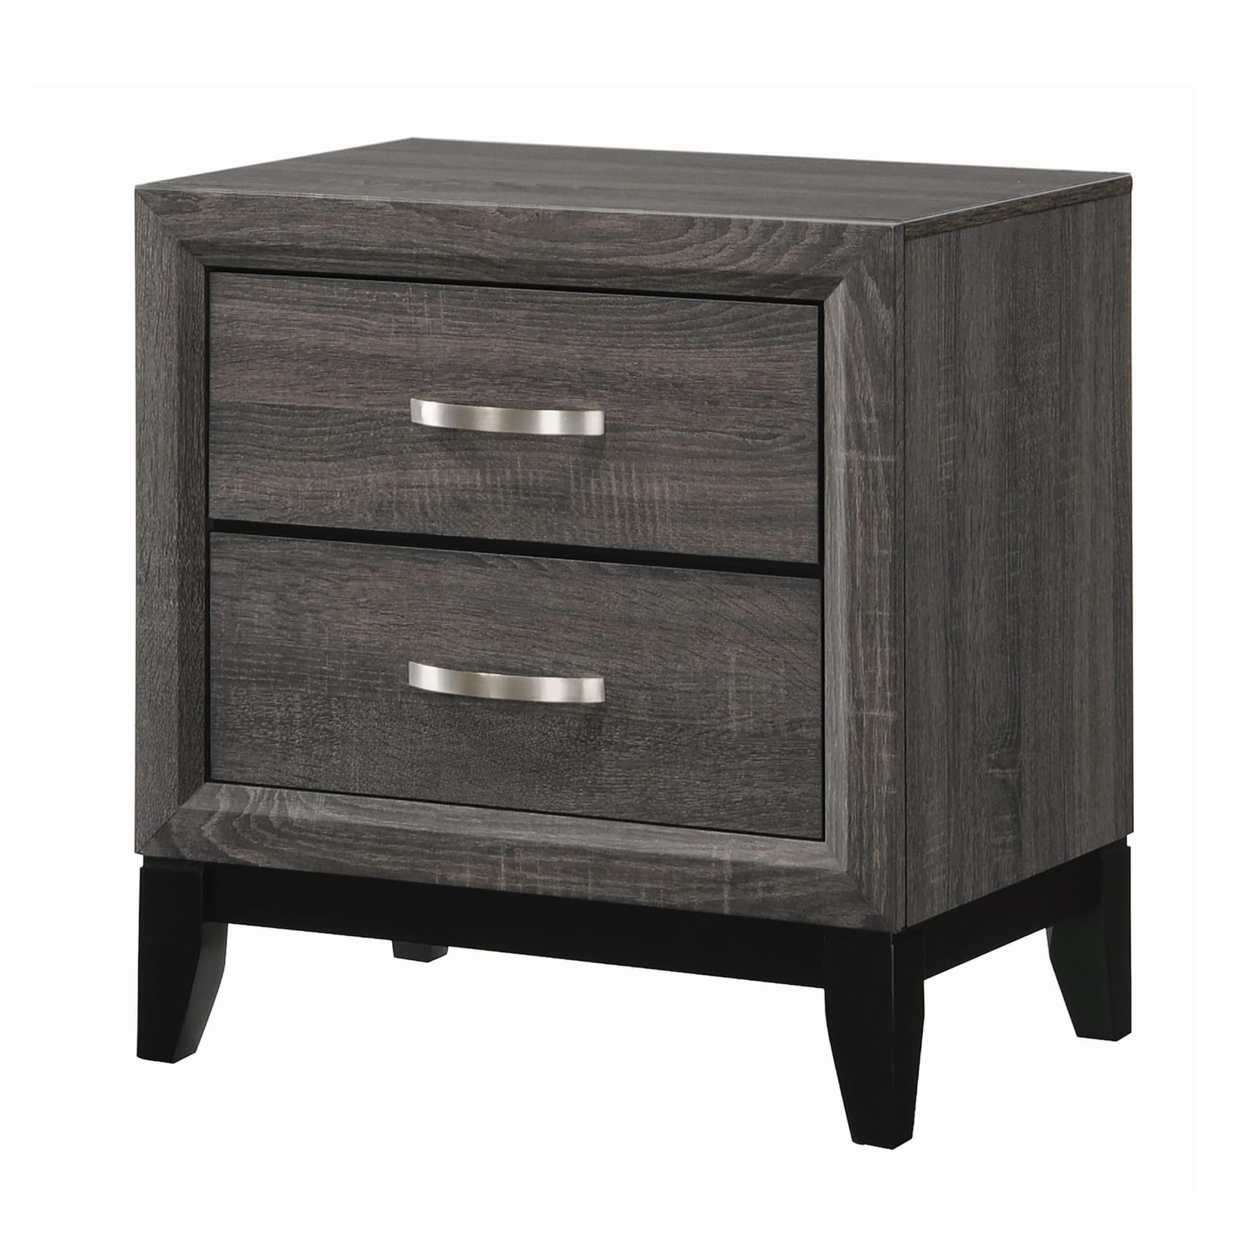 Wooden Nightstand With 2 Drawers And Chamfered Legs, Gray And Black- Saltoro Sherpi